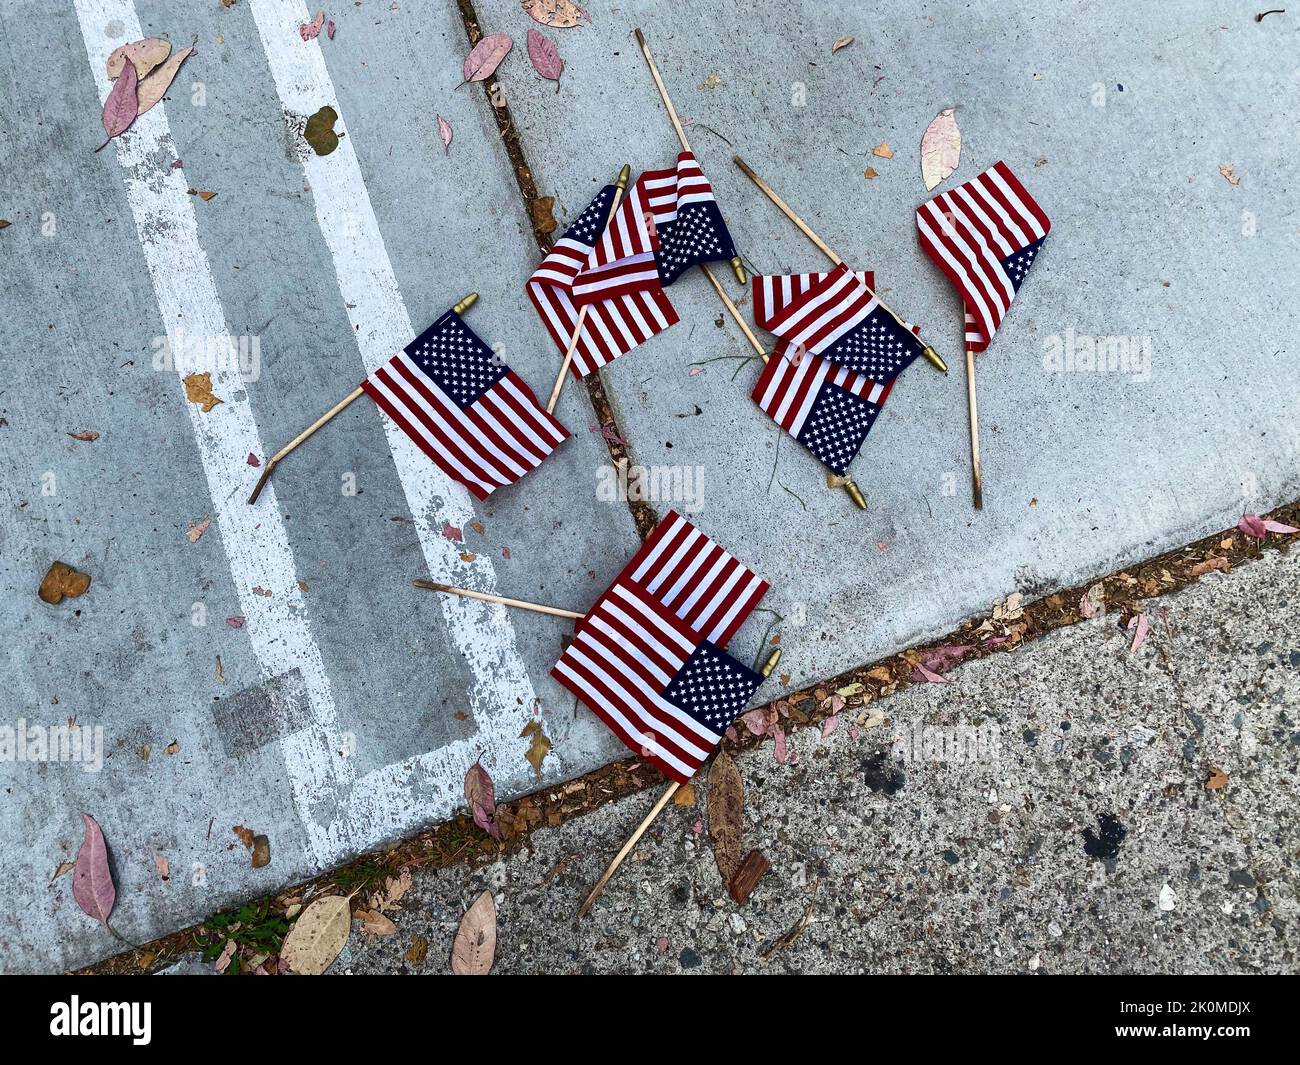 American flags on the ground after a celebration Stock Photo